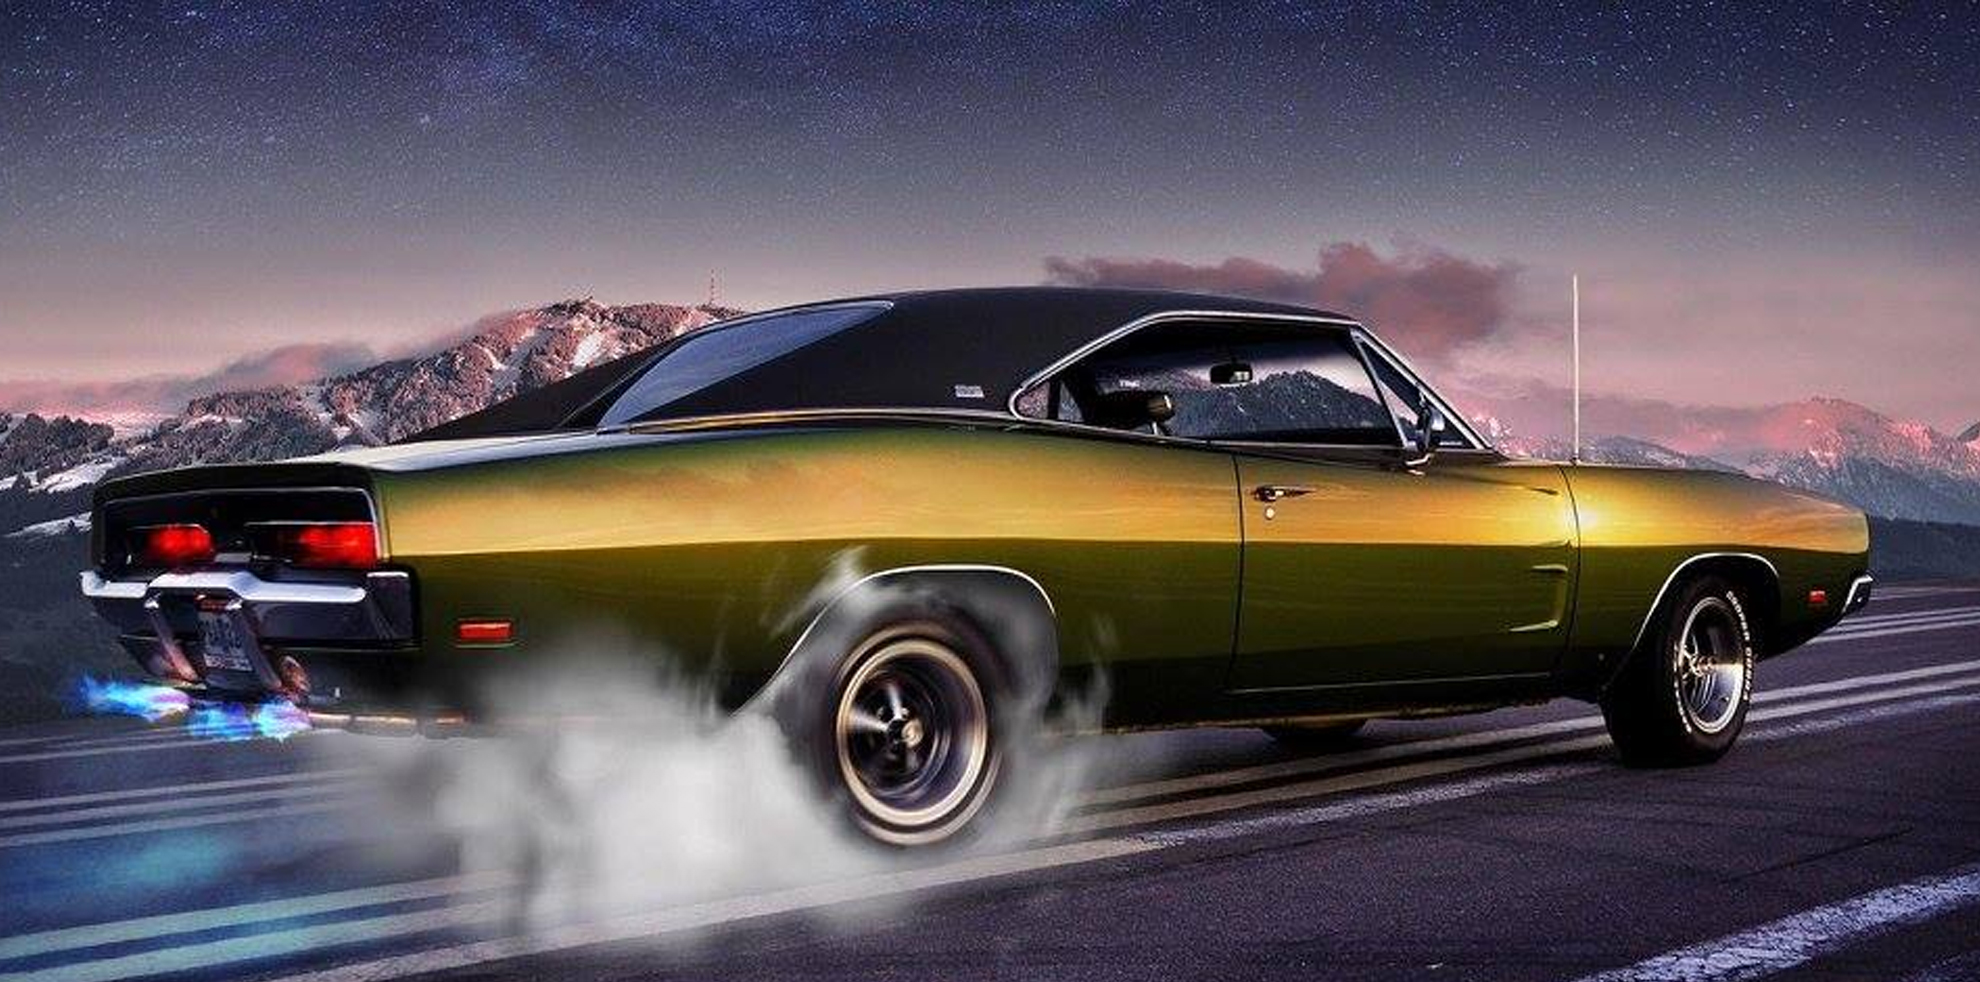 A Body Dodge Dart Demon Car Covers Indoor and Outdoor